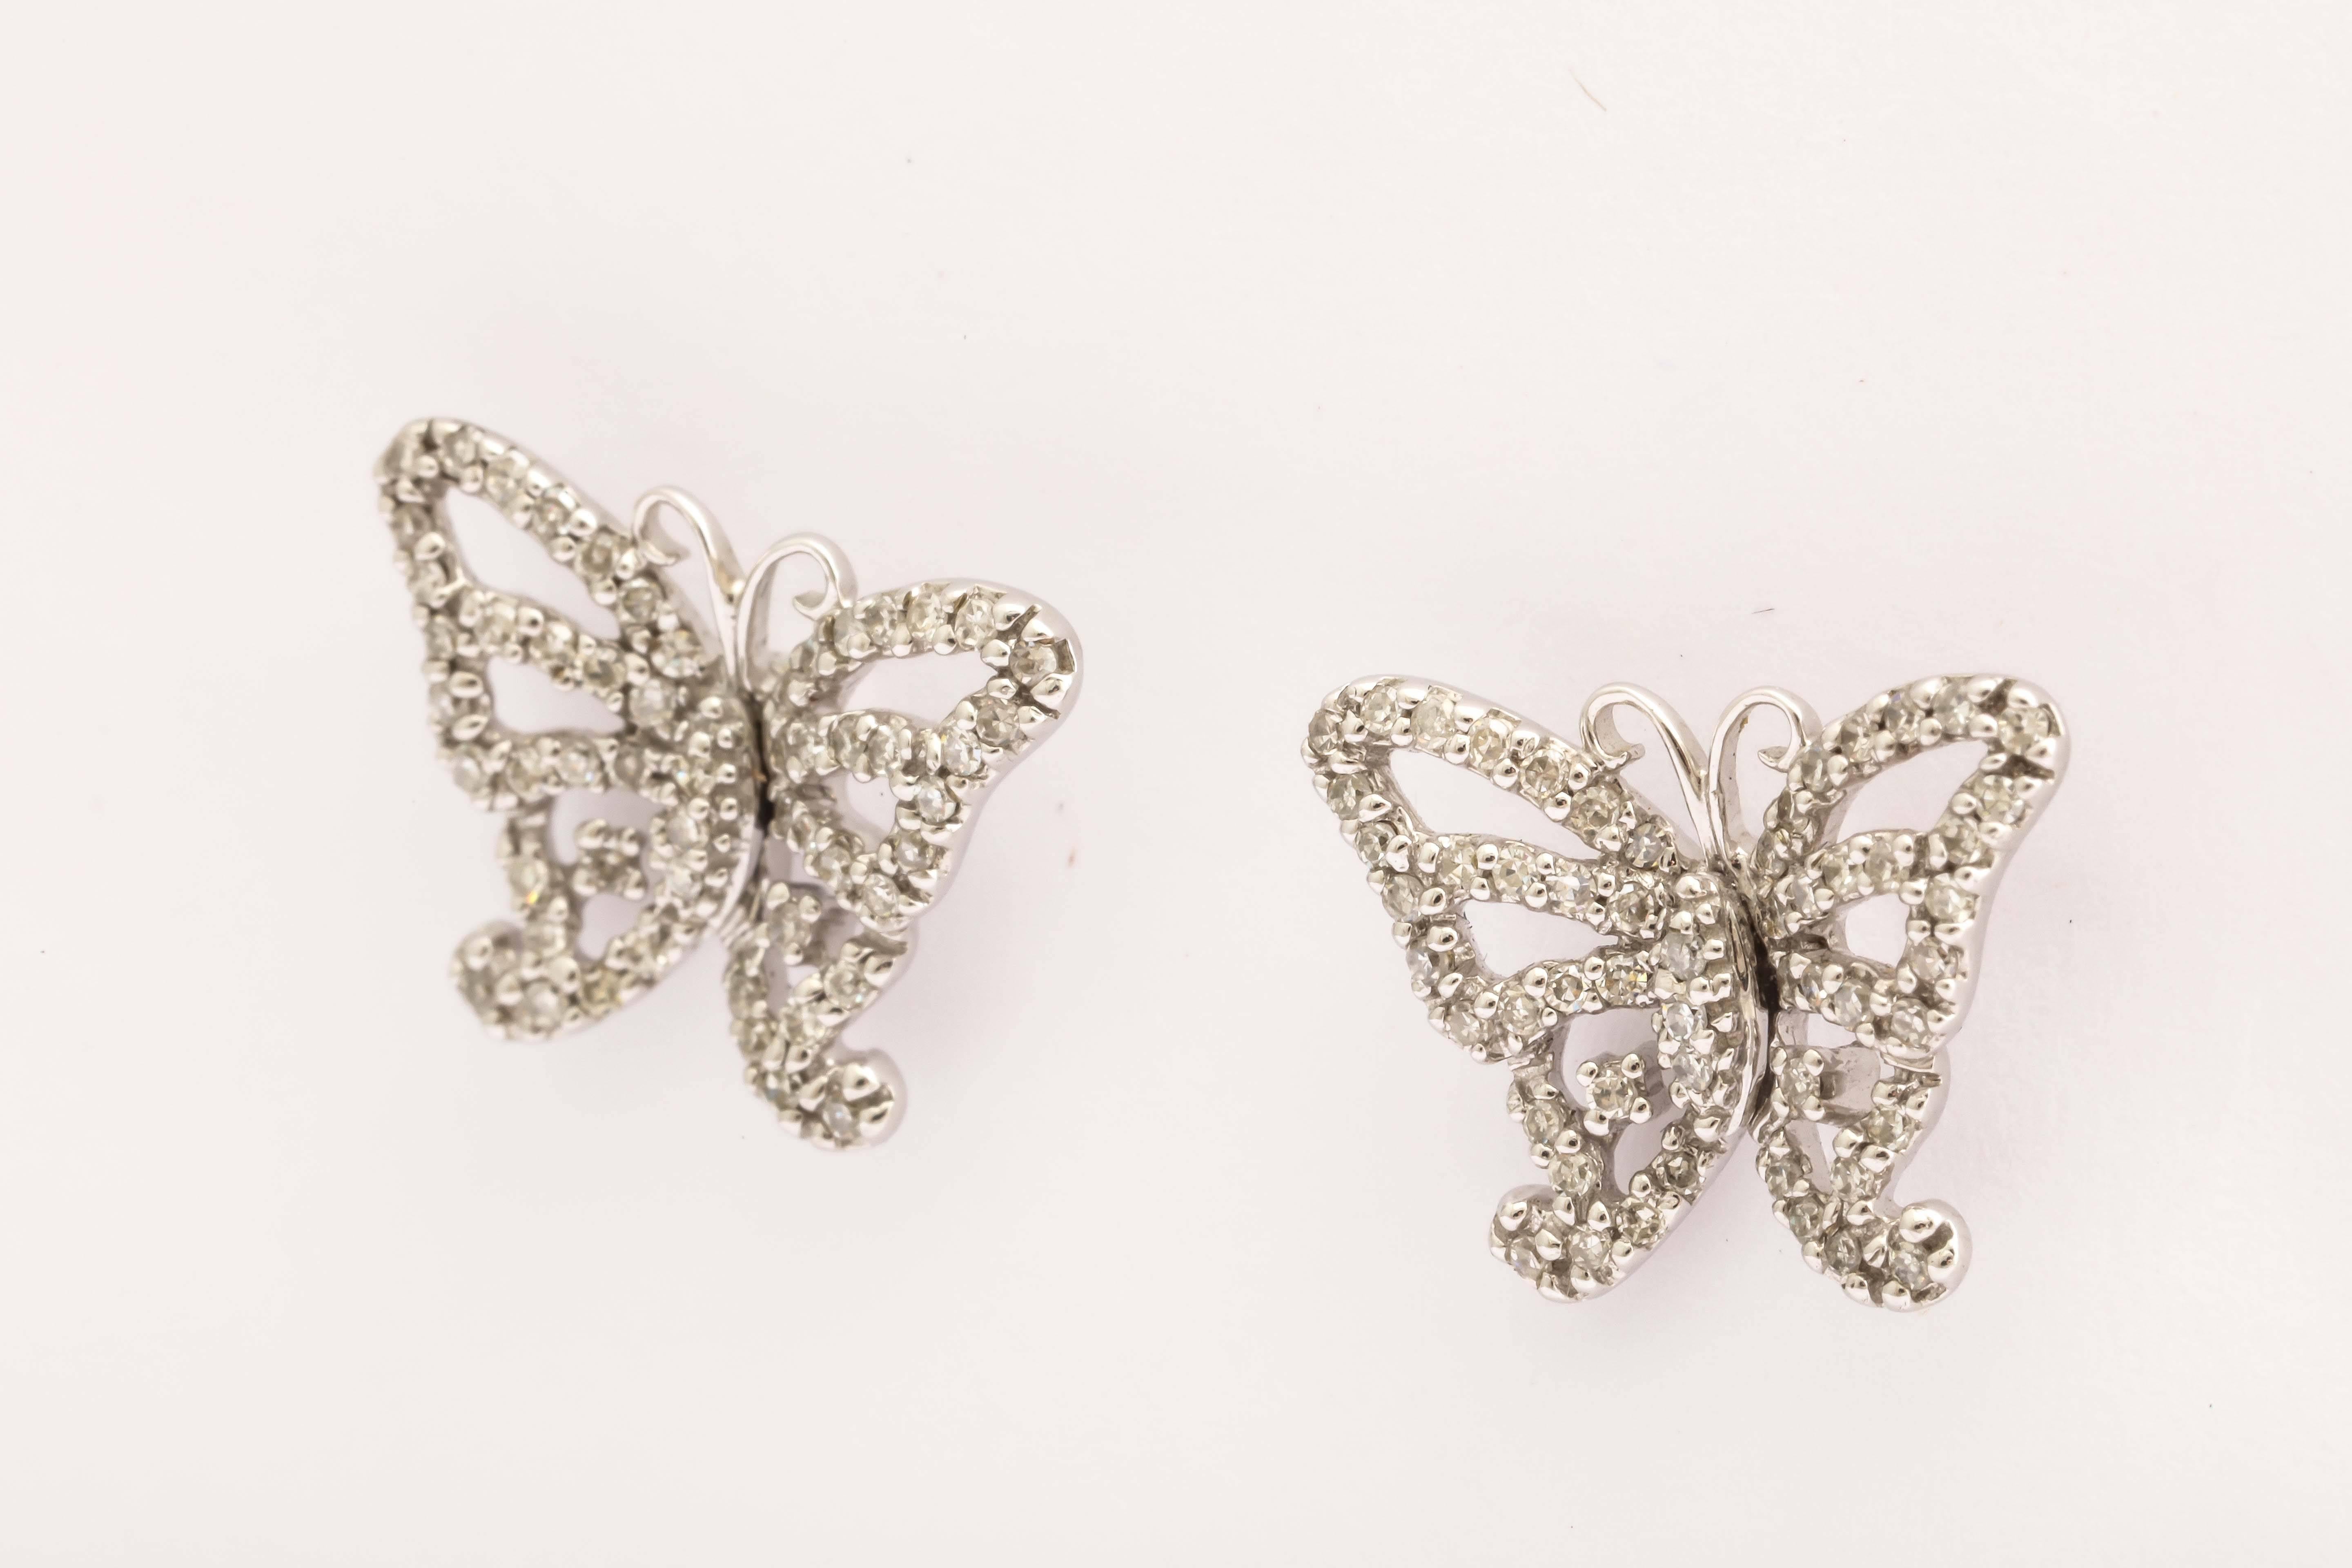 Sparkly 14kt  white gold and diamond butterfly earrings. Delicately set with .89 cts. white diamonds to light up your face. Fun to wear day or night.